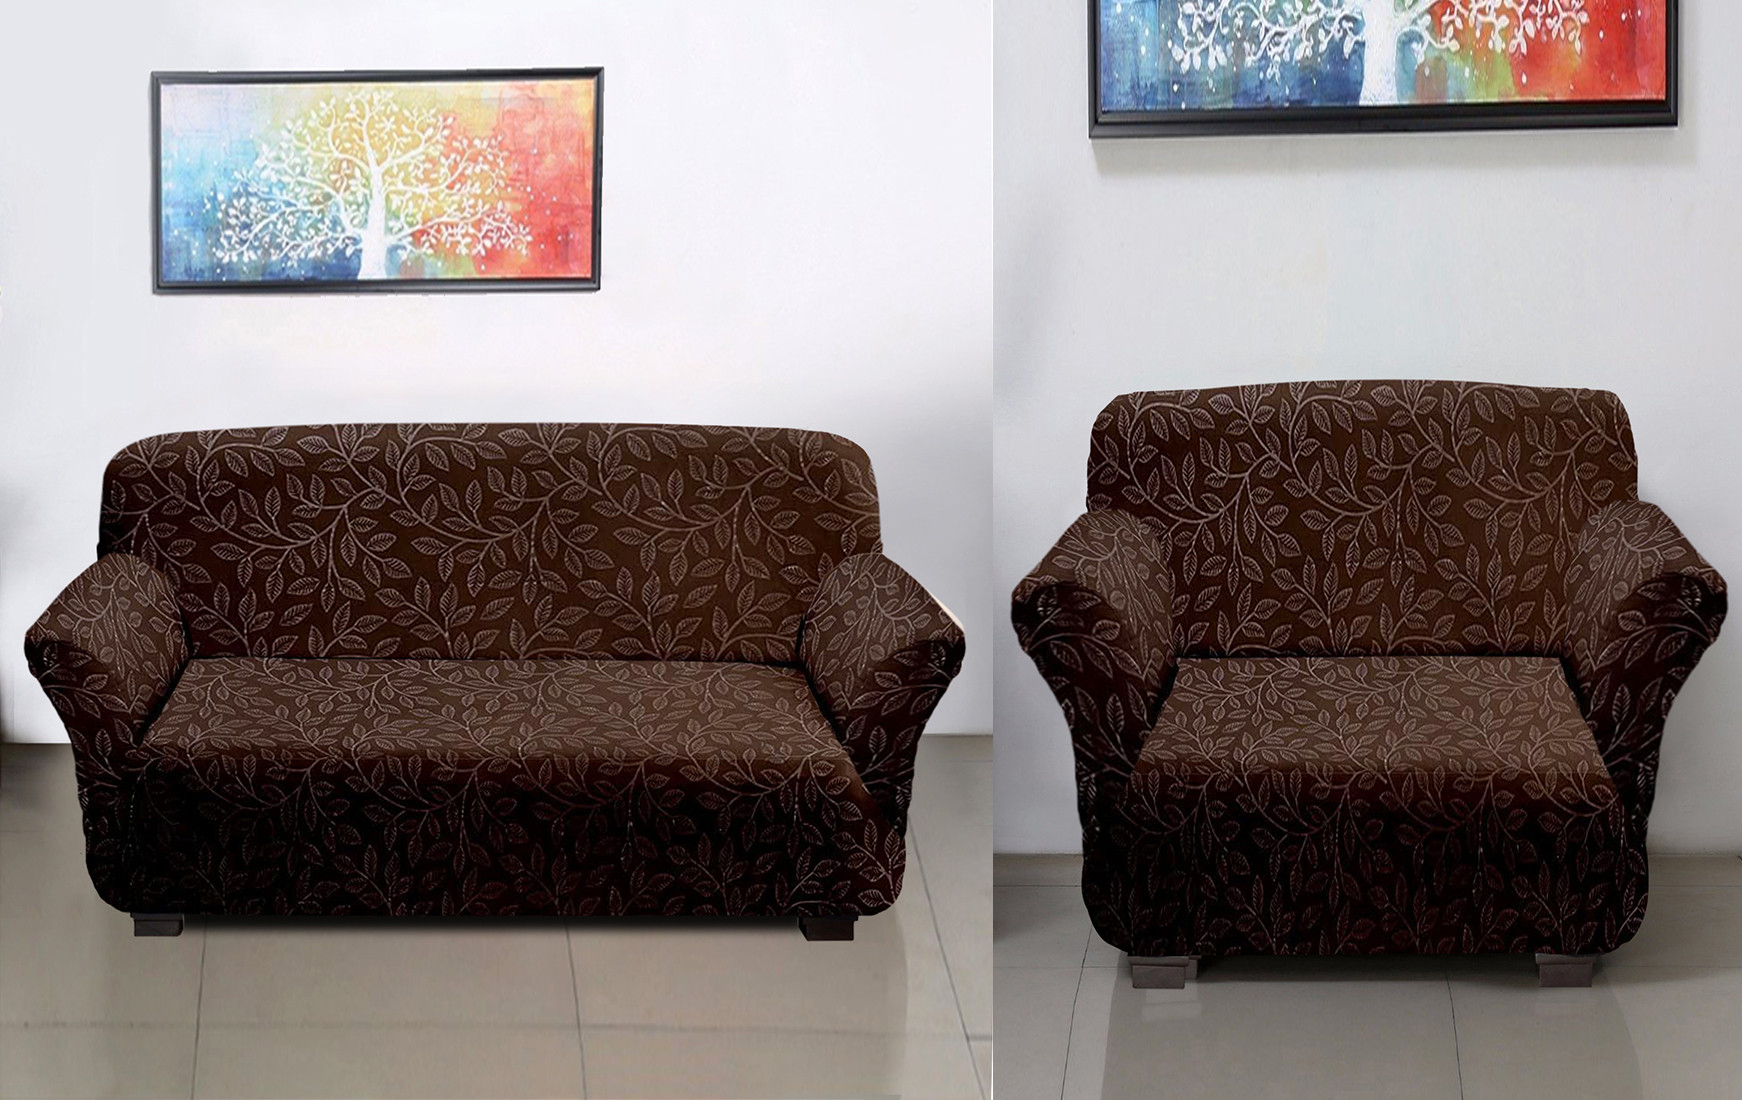 Kuber Industries Leaf Printed Stretchable, Non-Slip Polyster 1 & 3 Seater Sofa Cover/Slipcover/Protector Set With Foam Stick, Set of 2 (Brown)